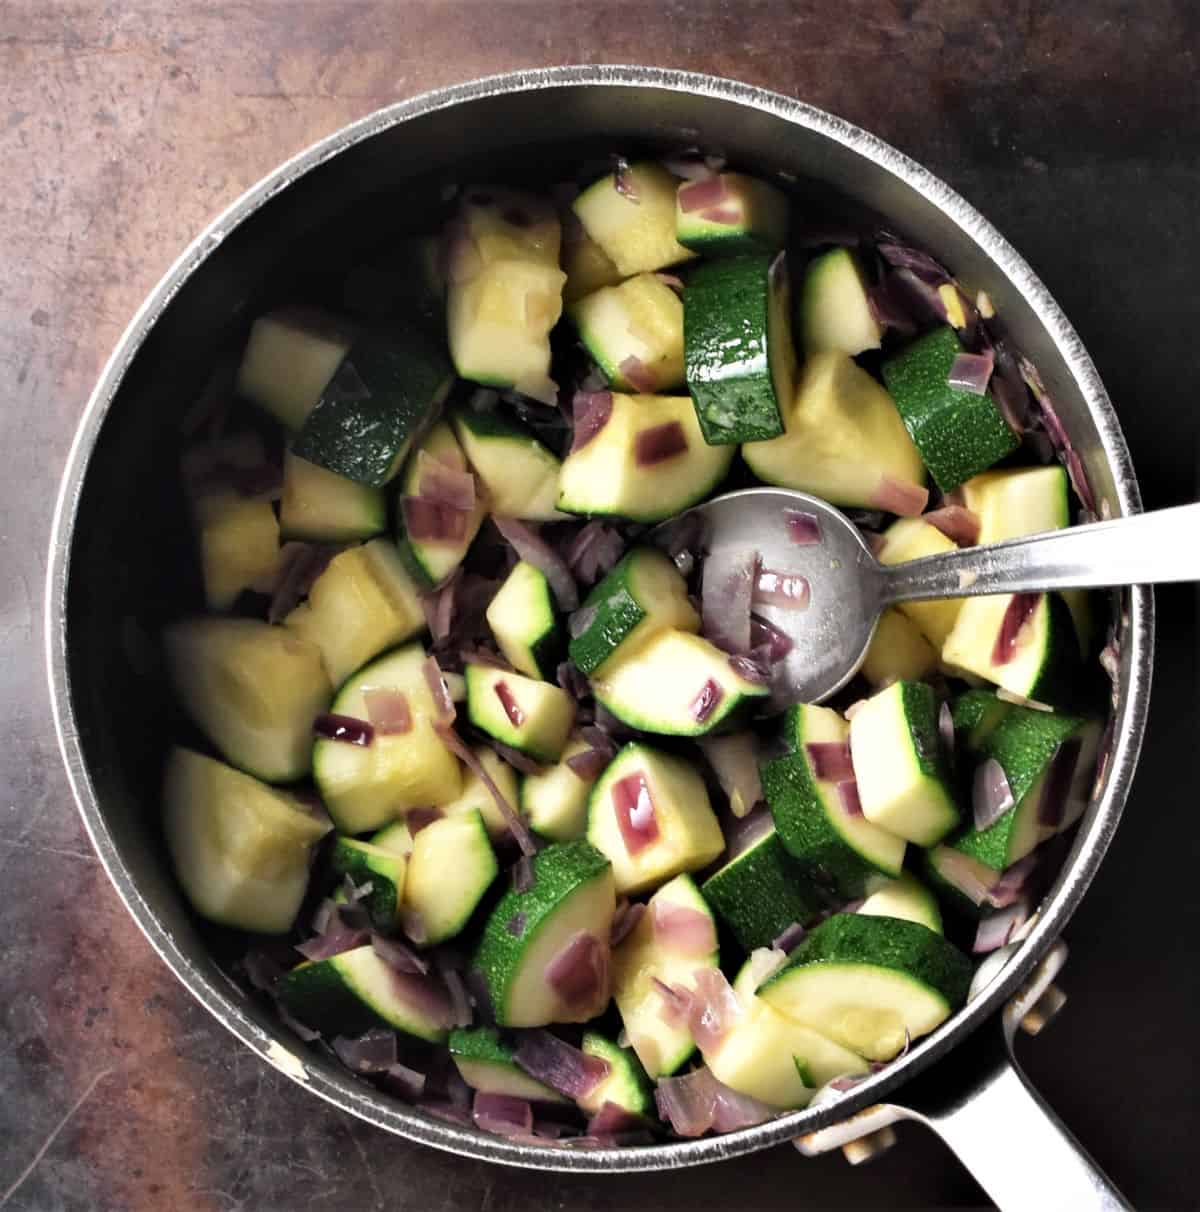 Chopped zucchini in pot with spoon.